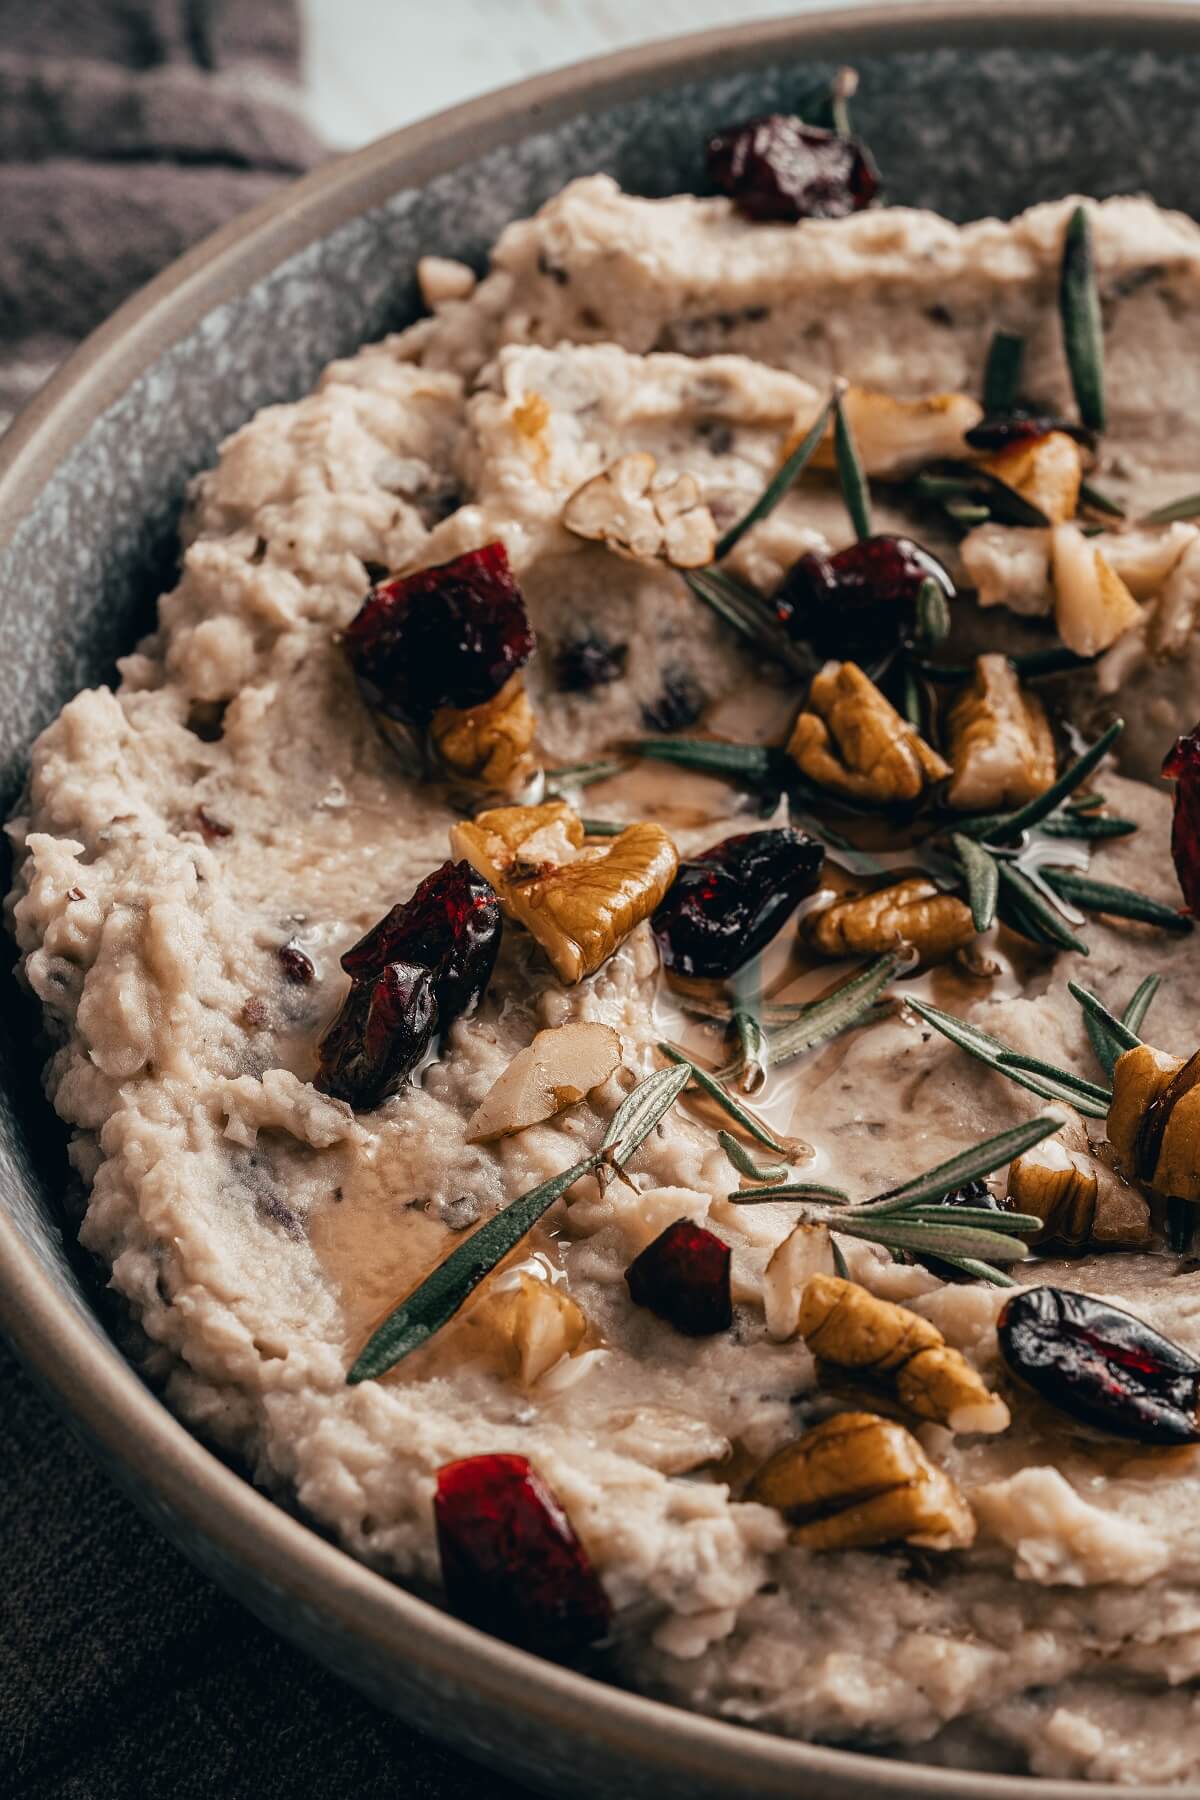 A grey bowl filled with white bean hummus garnished with walnuts, dried cranberries, and fresh rosemary.